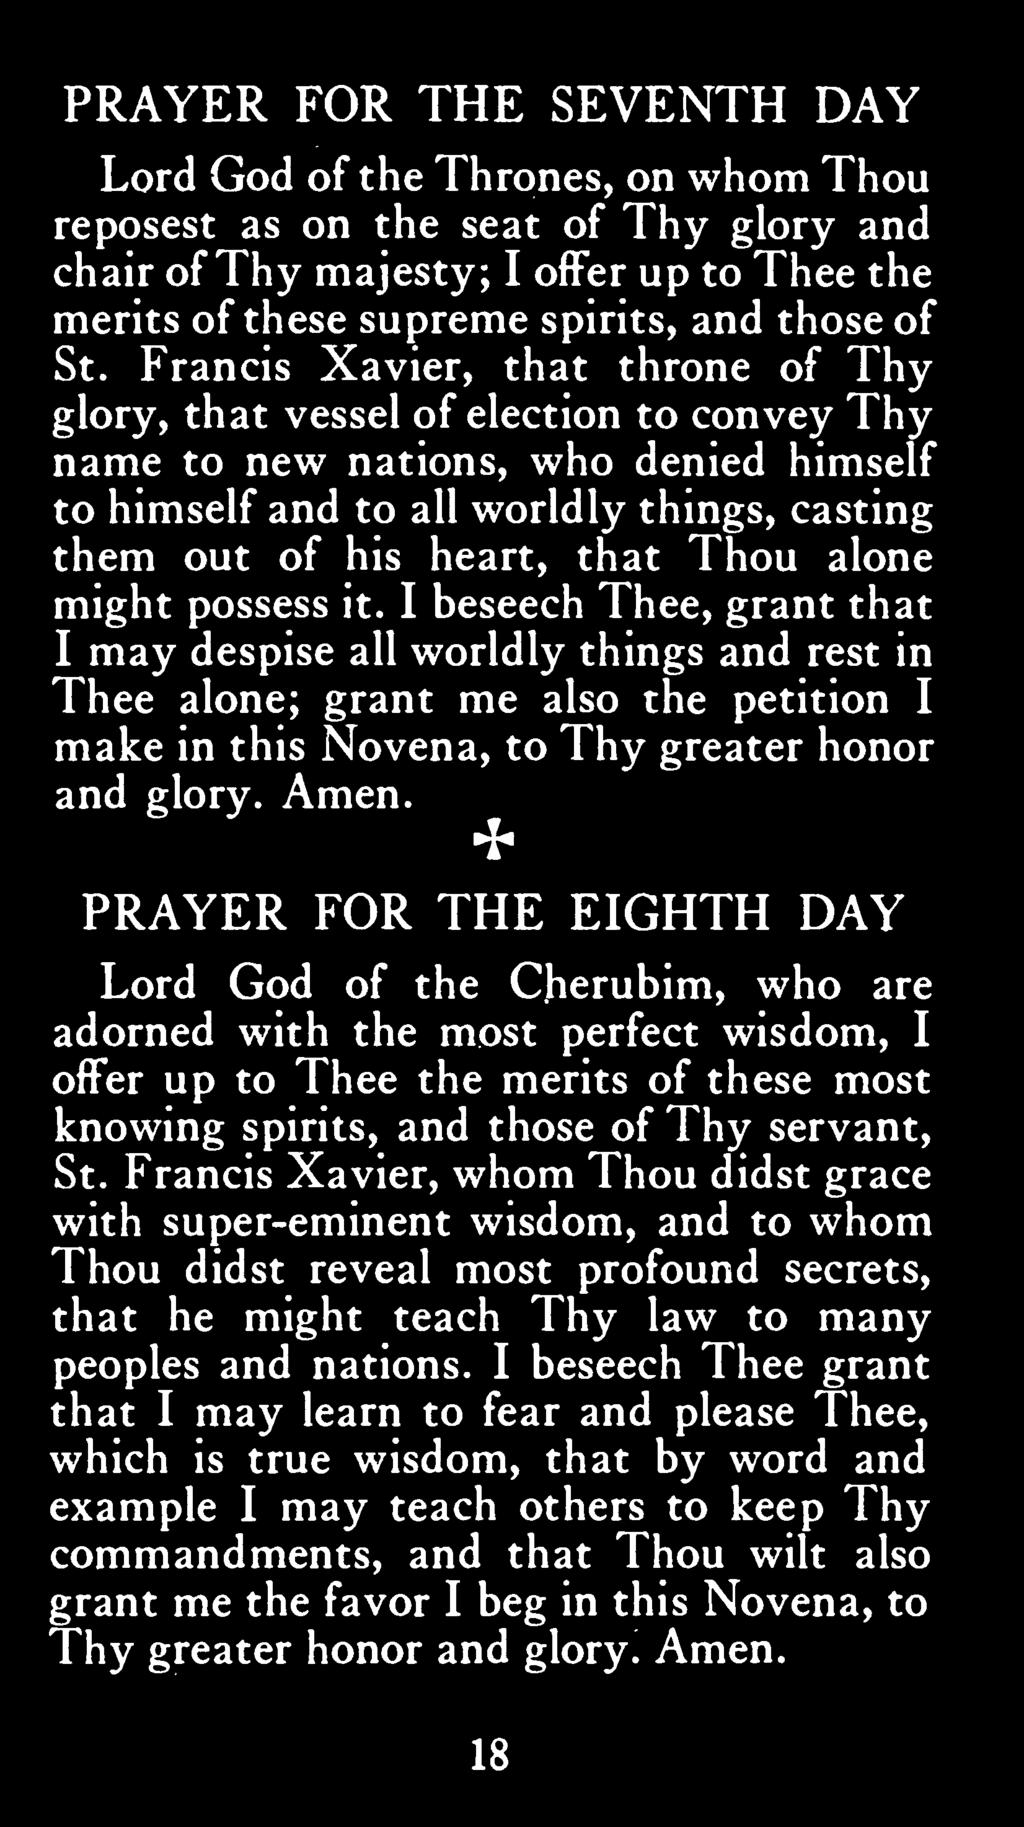 alone might possess it. I beseech Thee, grant that I may despise all worldly things and rest in Thee alone; grant me also the petition I make in this Novena, to Thy greater honor and glory. Amen.